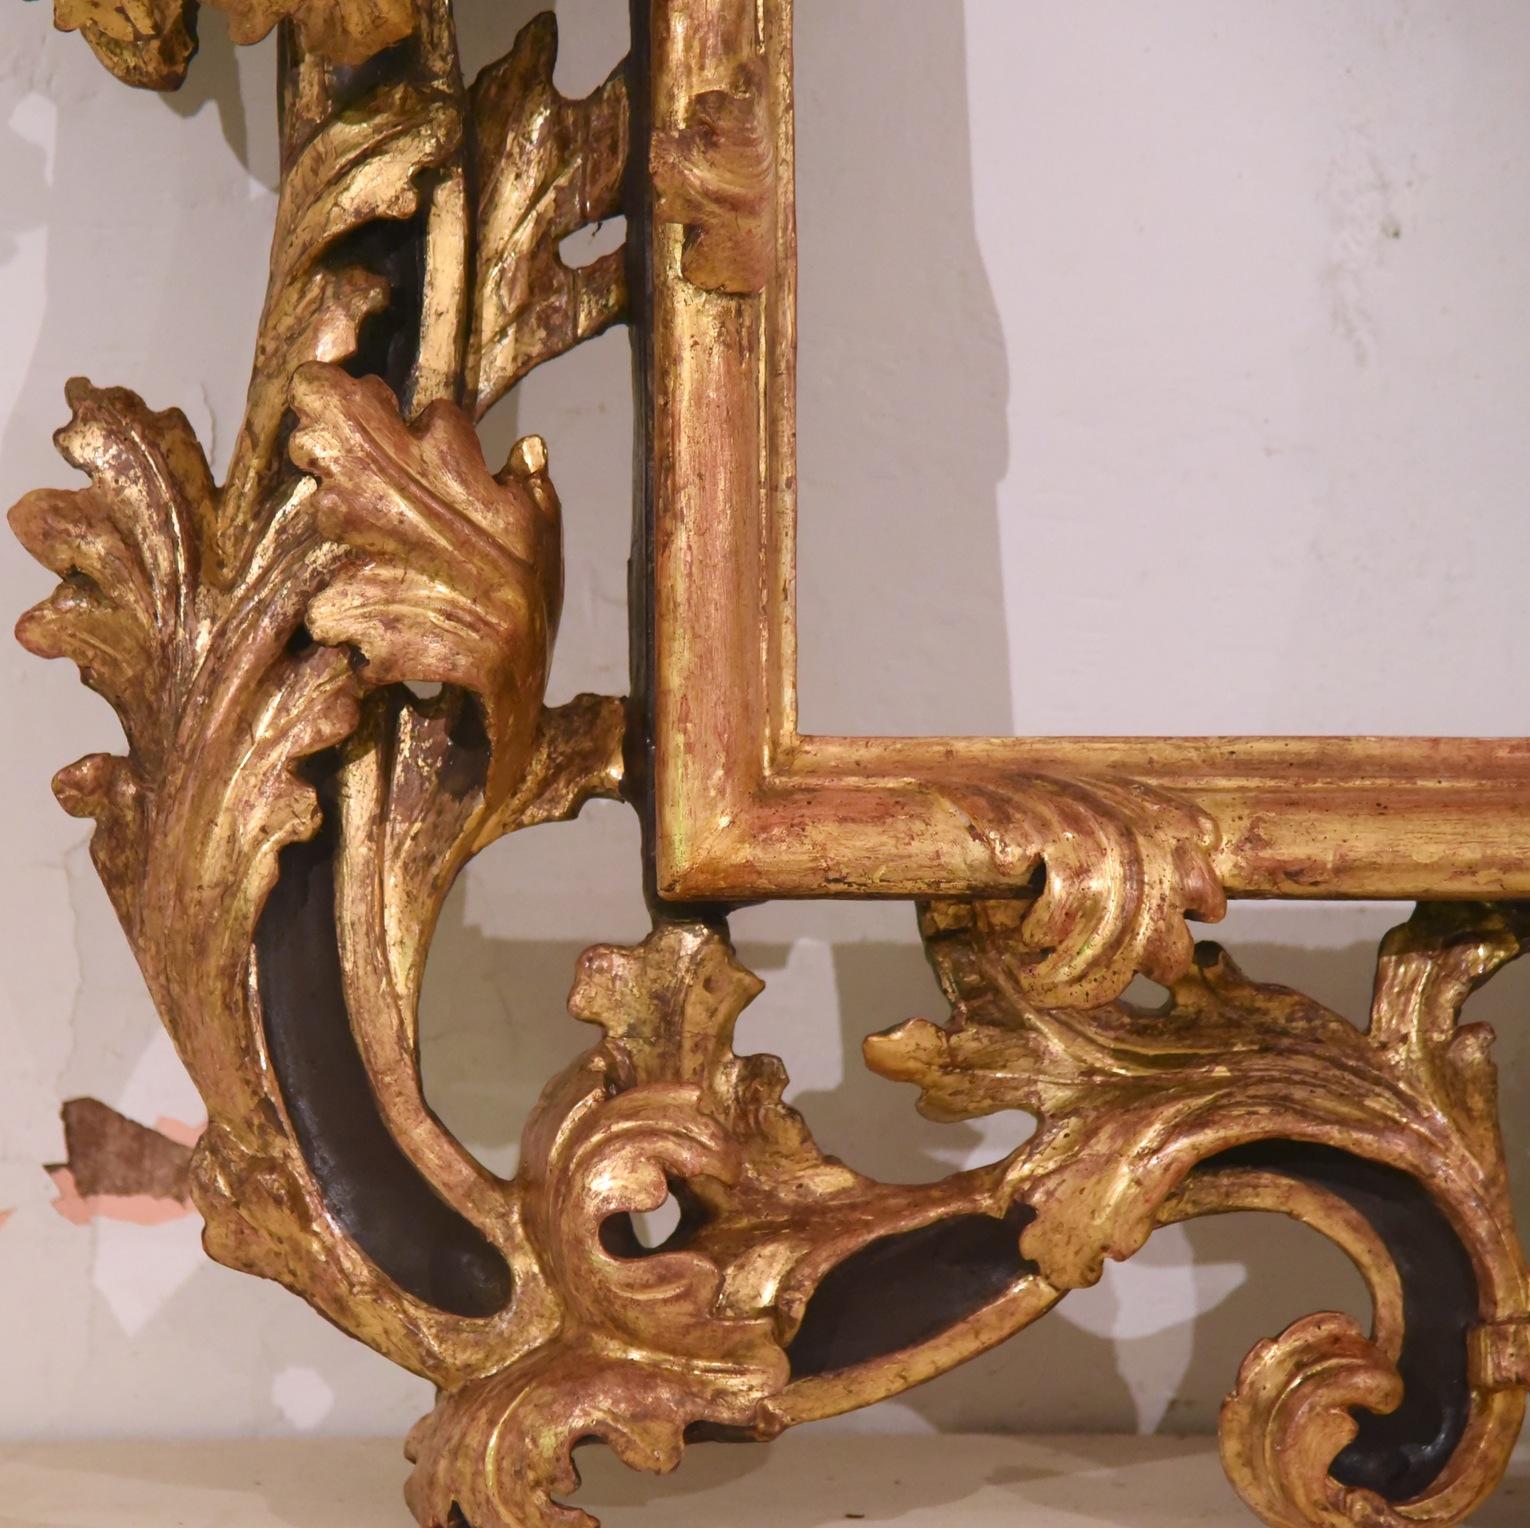 Refined Brustolon frame, mirror from the 1600s Venetian school, in richly carved wood with large curved leaves, typical of the Brustolon style, the gilding is in gold leaf.